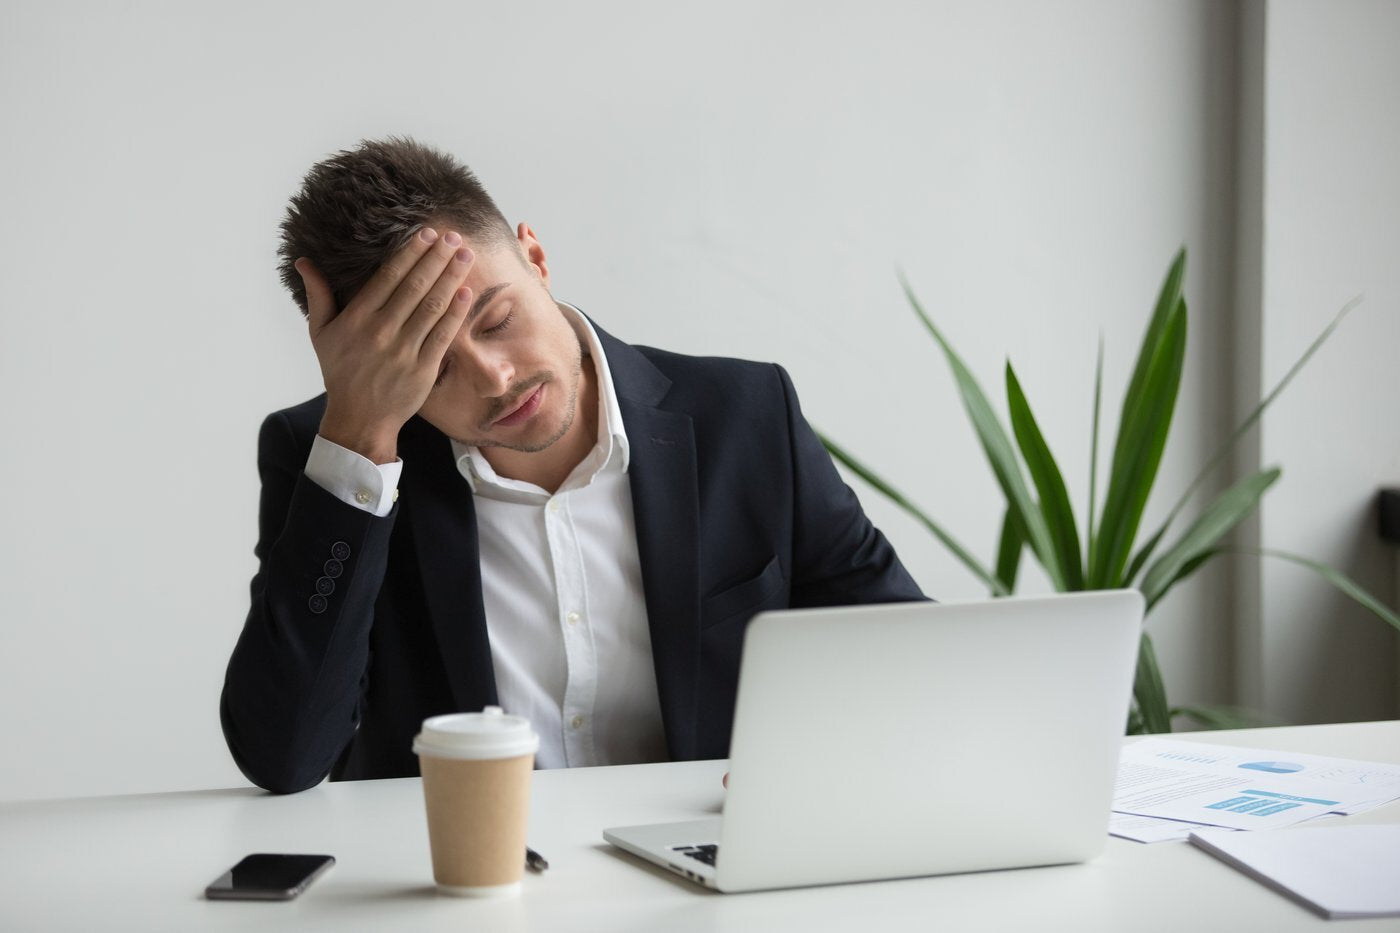 HOW TO DEAL WITH JOB BURNOUT...